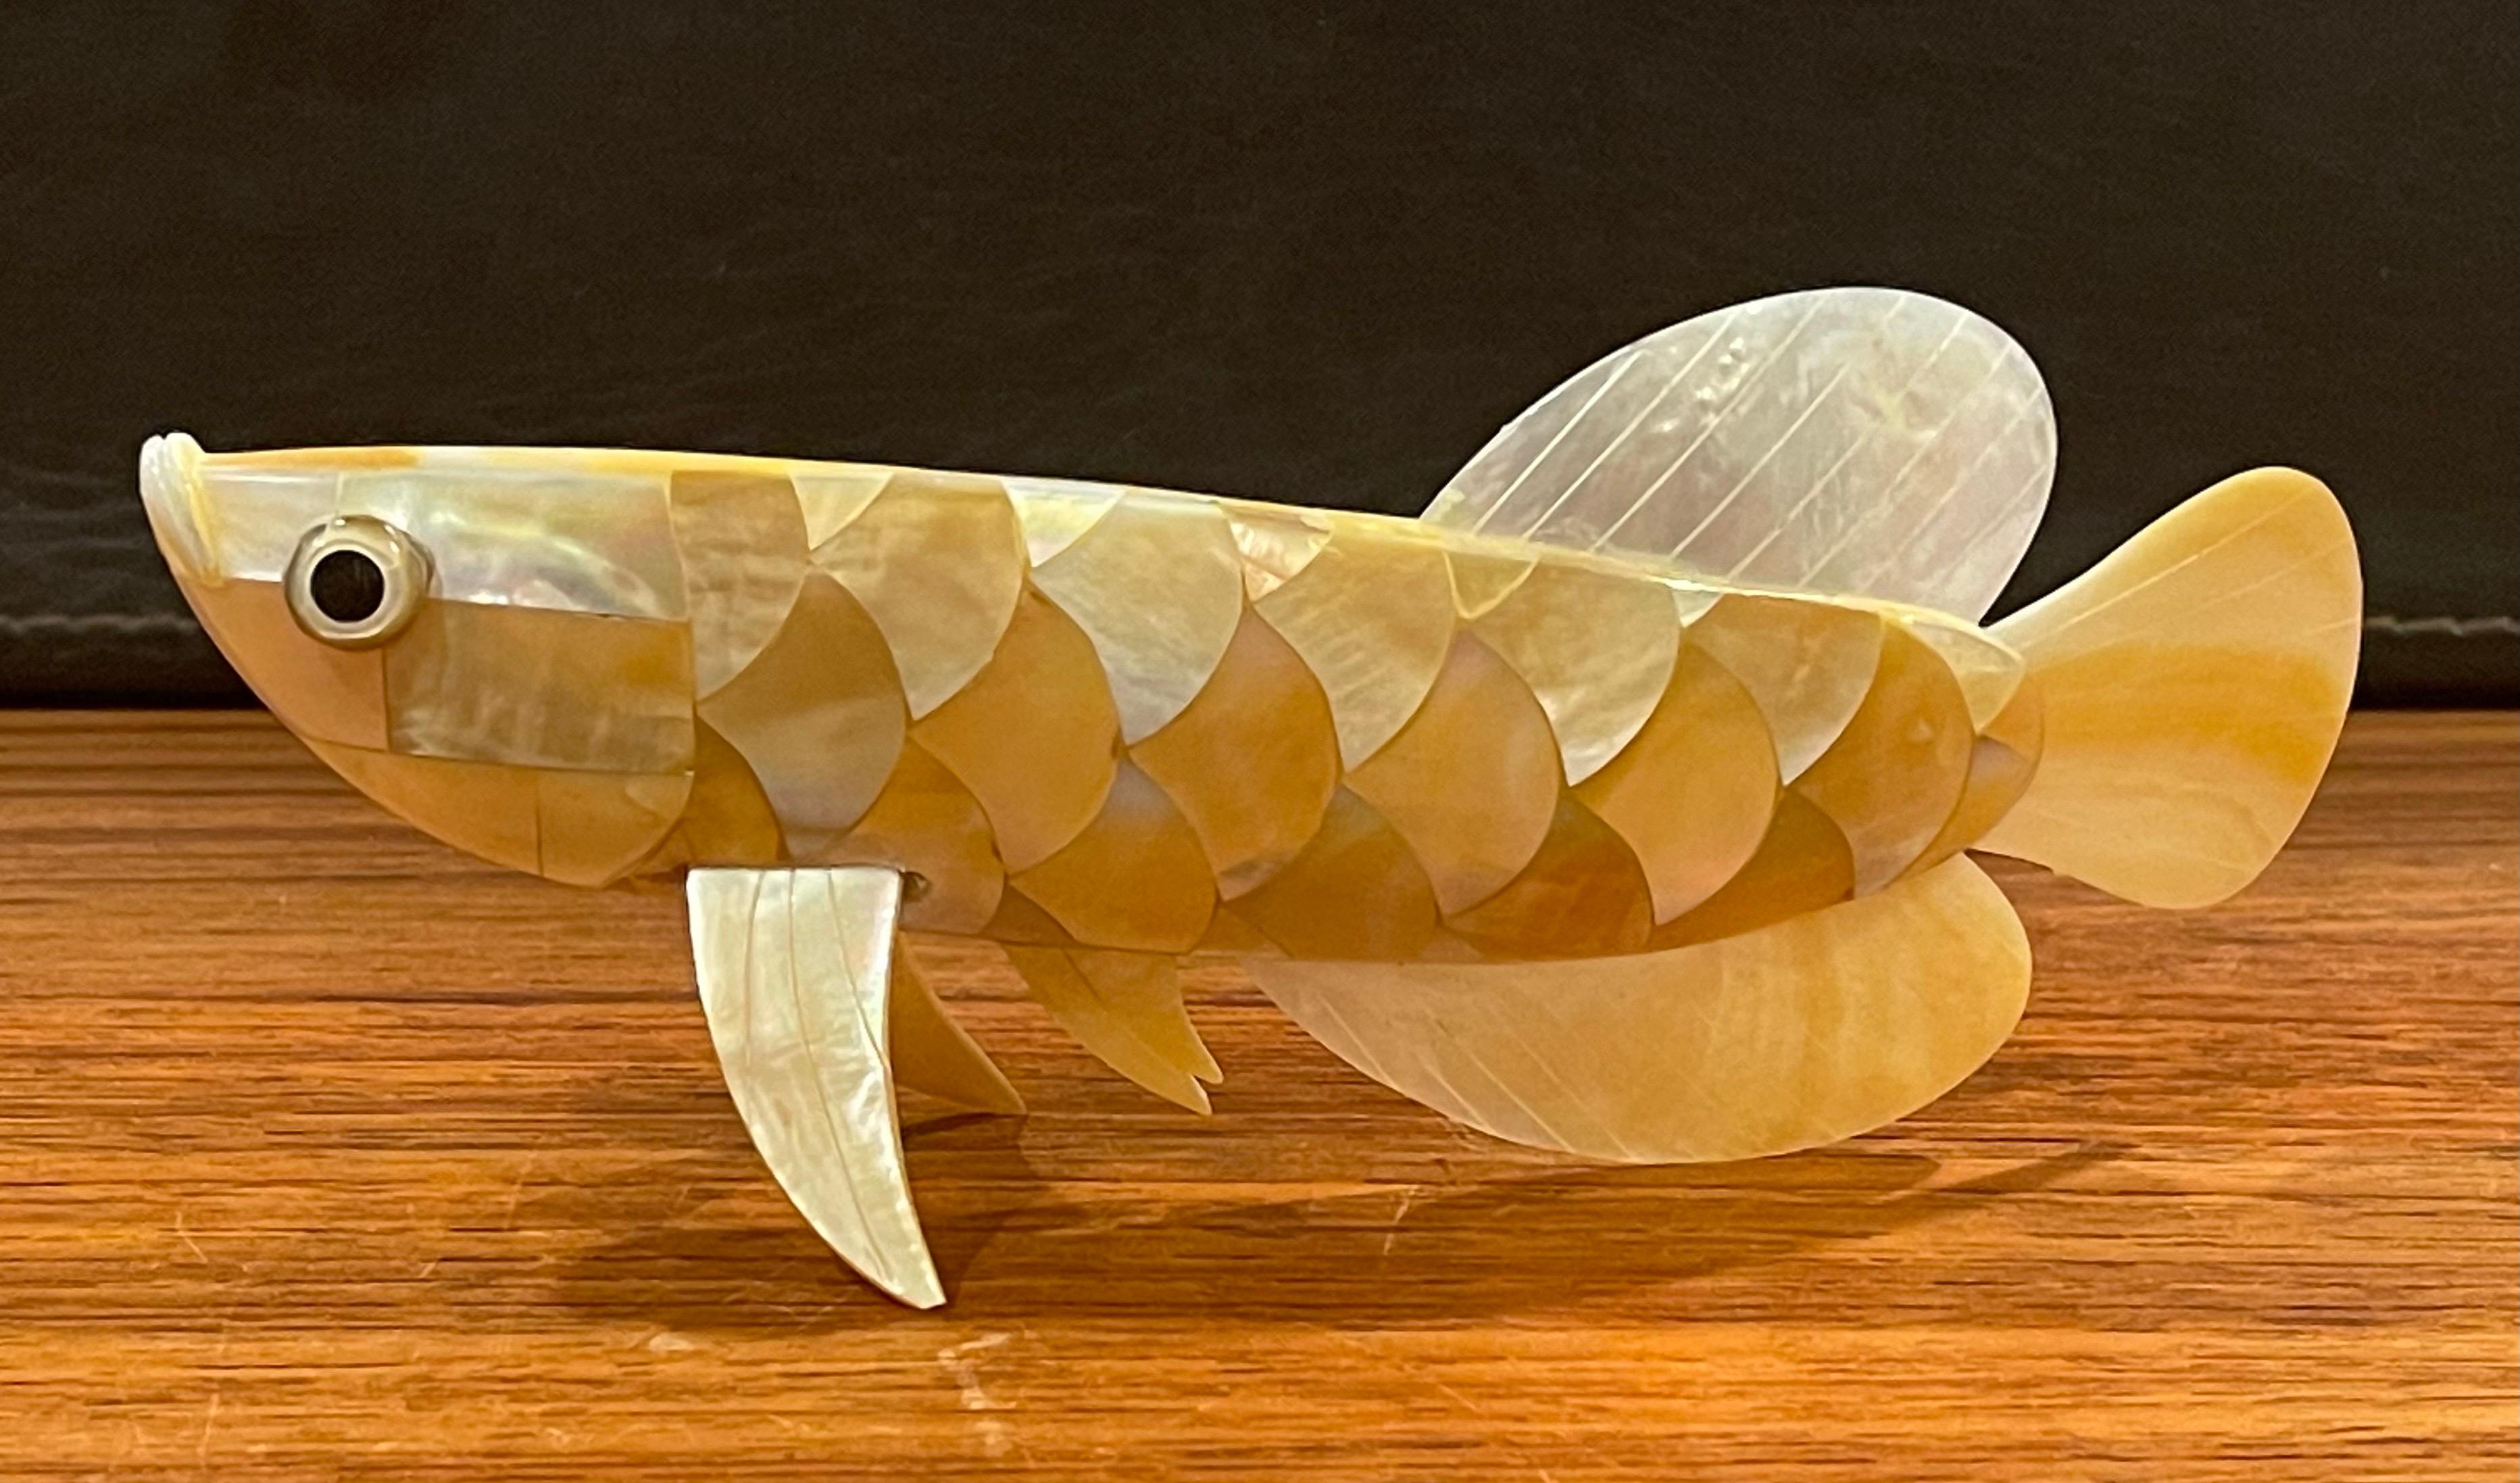 A vey nice mother of pearl / abalone shell handmade fish sculpture, circa 1990s. The piece is well detailed and the craftsmanship is amazing. The sculpture is in very good condition; with one small piece of shell is missing (please see pictures) but